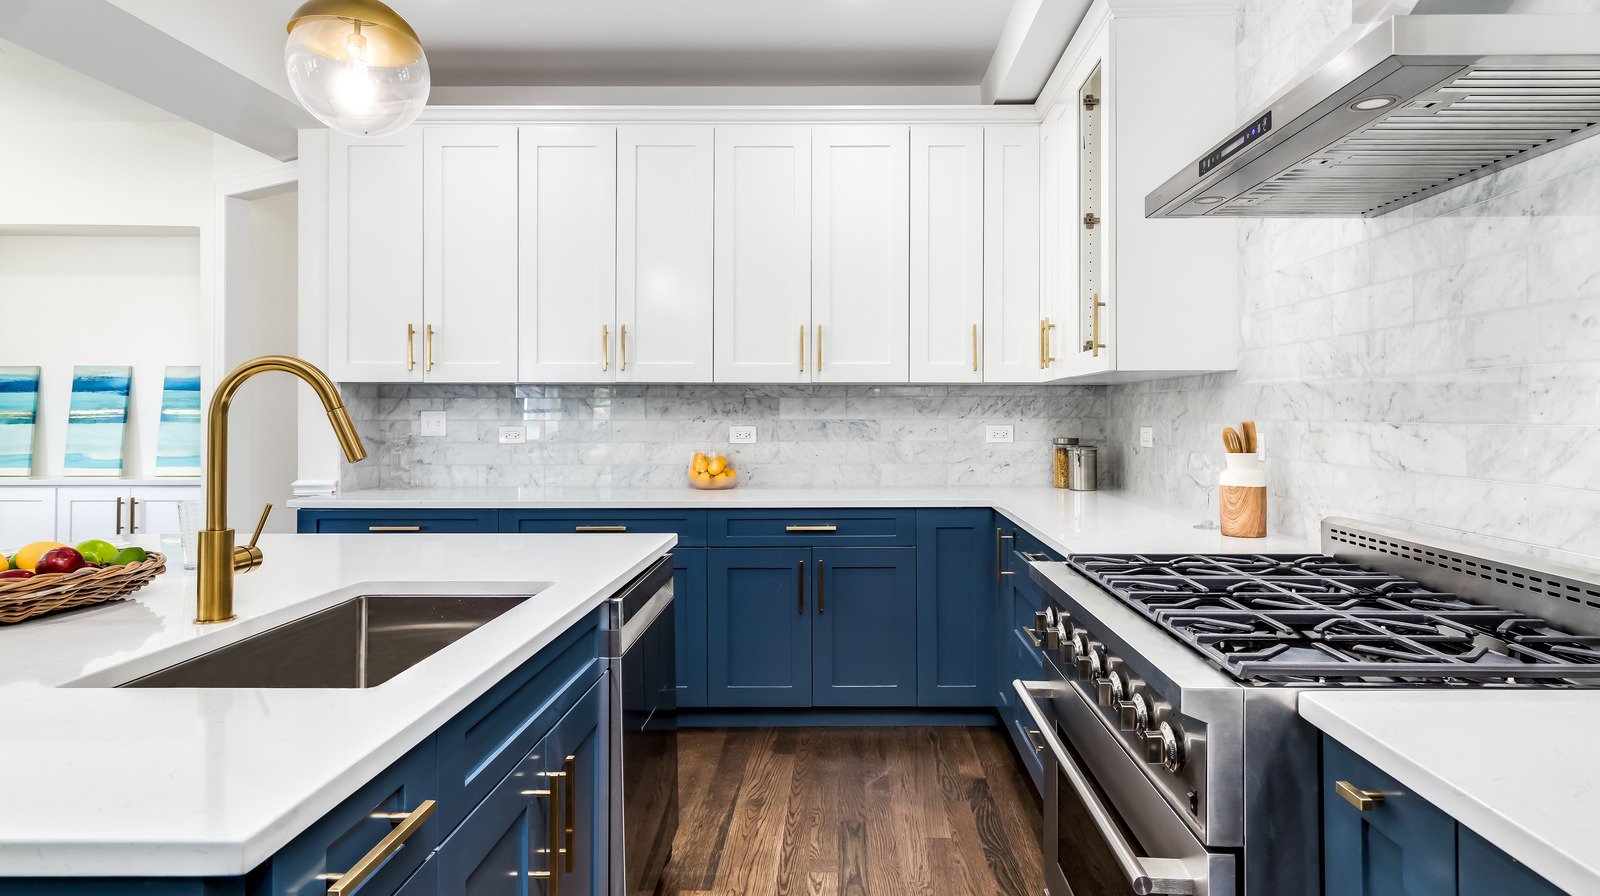 These Are The Best Kitchen Cabinet Colors - House Digest